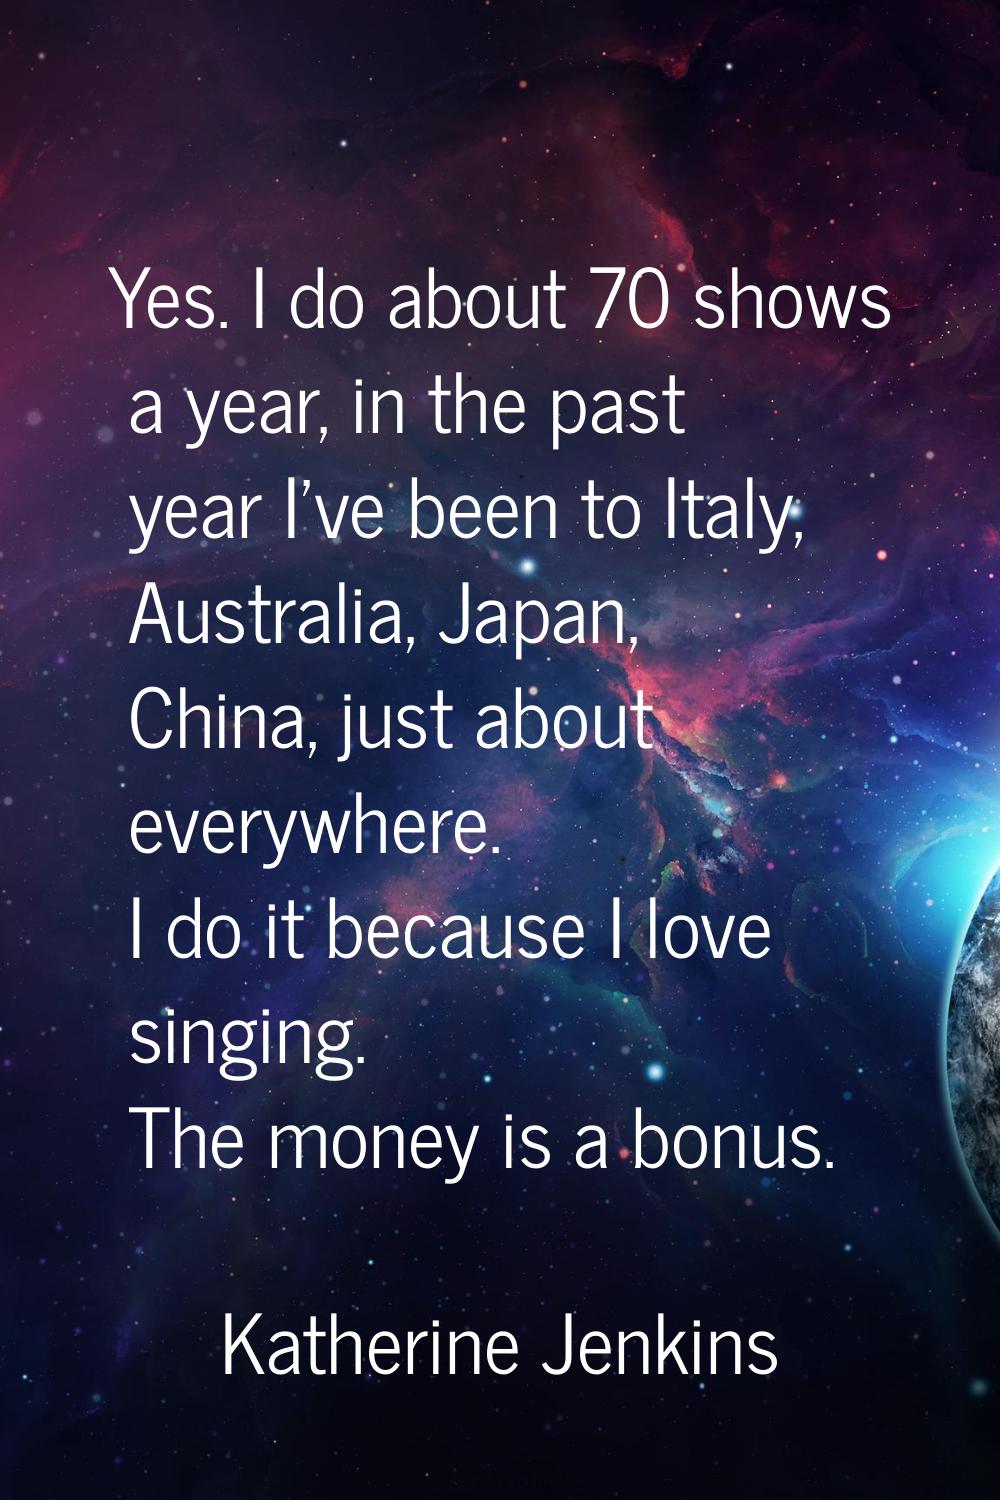 Yes. I do about 70 shows a year, in the past year I've been to Italy, Australia, Japan, China, just